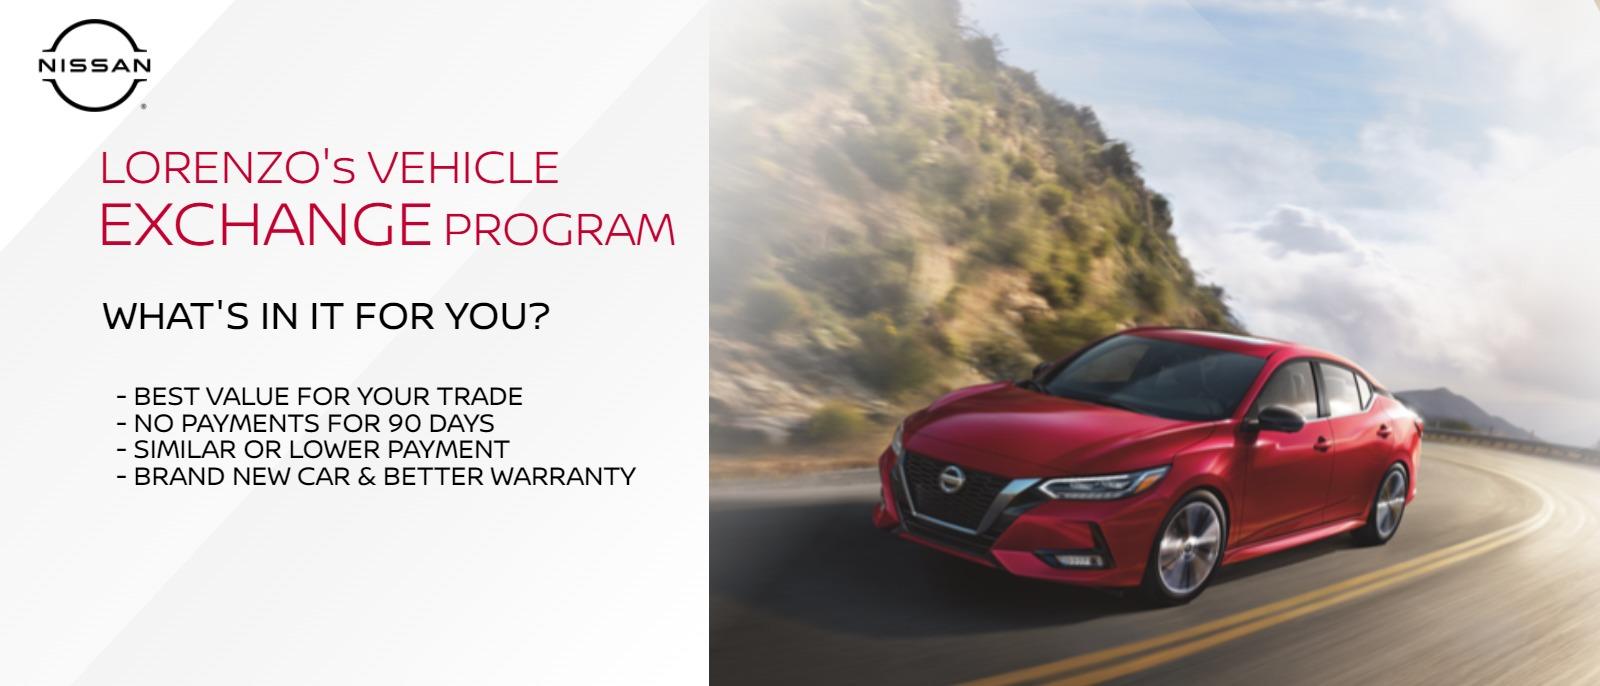 LORENZO's VEHICLE EXCHANGE PROGRAM

WHAT'S IN IT FOR YOU?
-BEST VALUE FOR YOUR TRADE
-NO PAYMENTS FOR 45 DAYS
-SIMILAR OR LOWER PAYMENT
-BRAND NEW CAR & BETTER WARRANTY